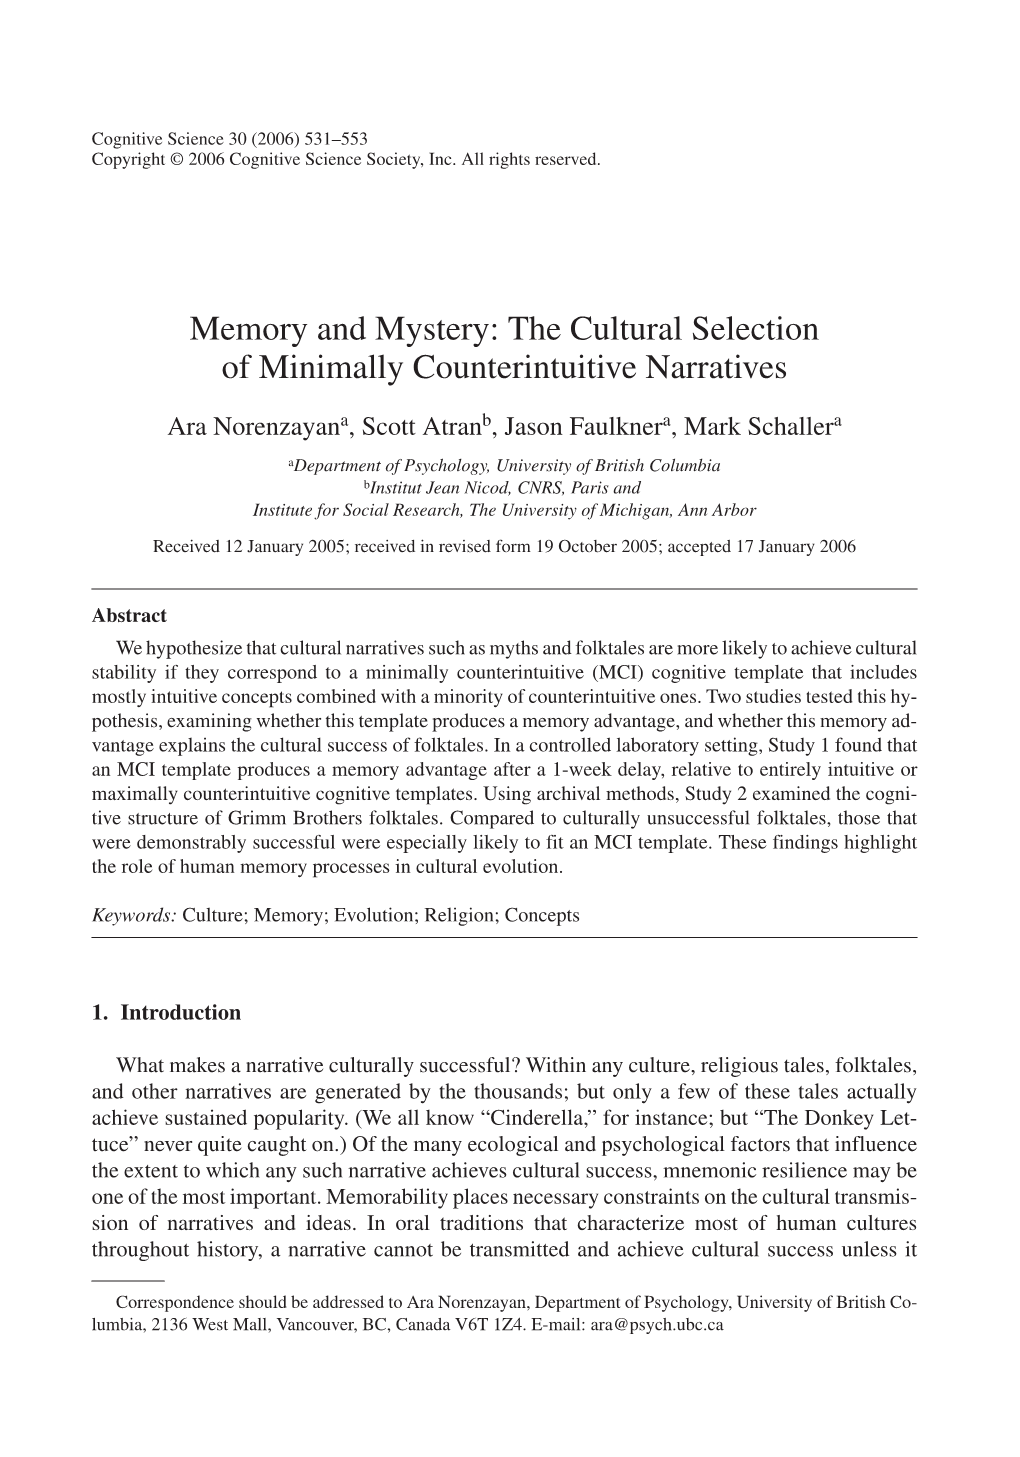 Memory and Mystery: the Cultural Selection of Minimally Counterintuitive Narratives